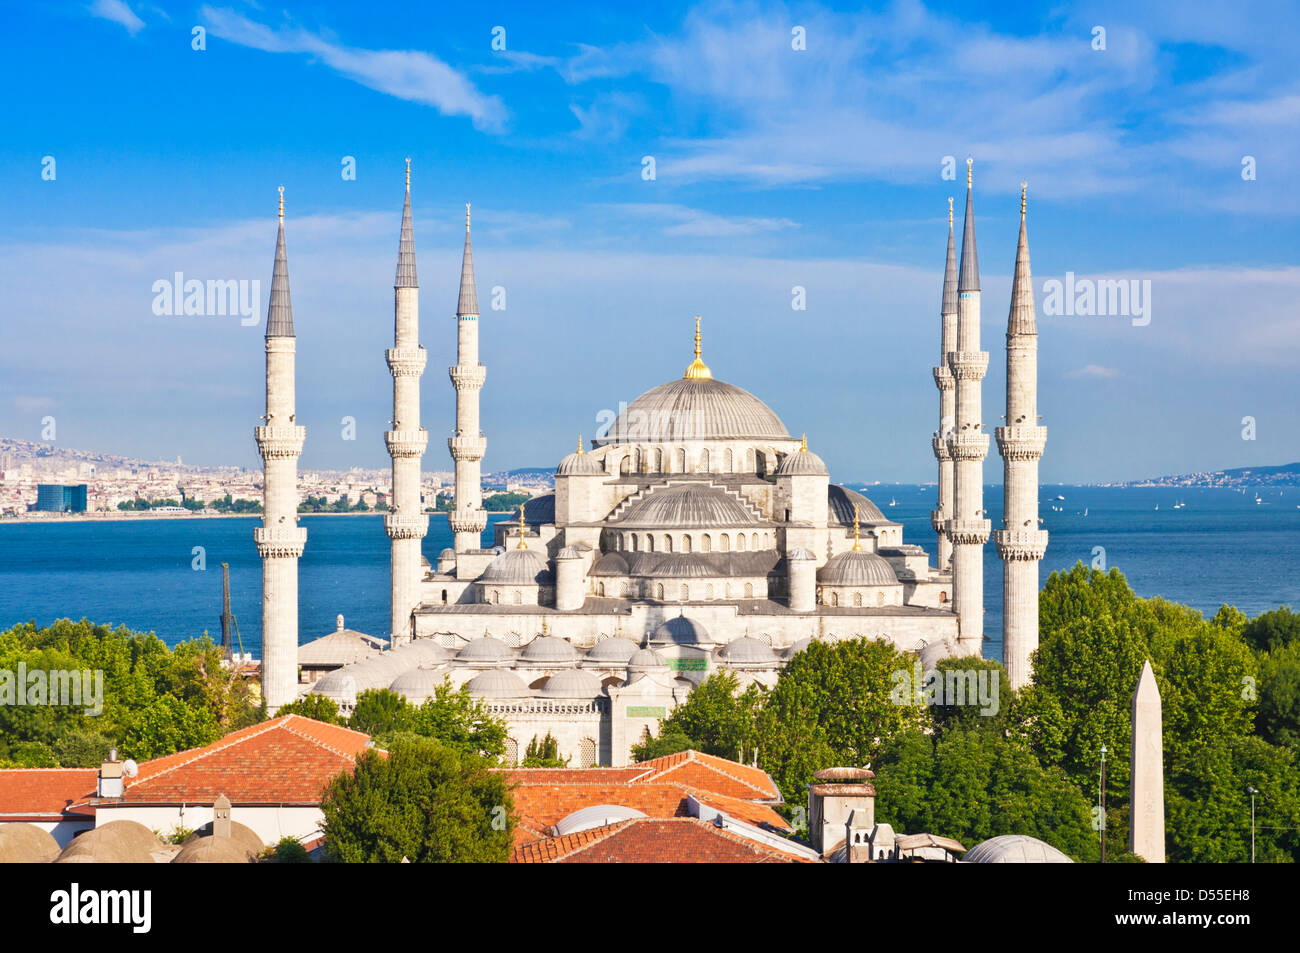 The Blue Mosque or Sultan Ahmed Mosque with five main domes, six minarets and eight small domes on the Istanbul skyline Sultanahmet, central Istanbul Stock Photo